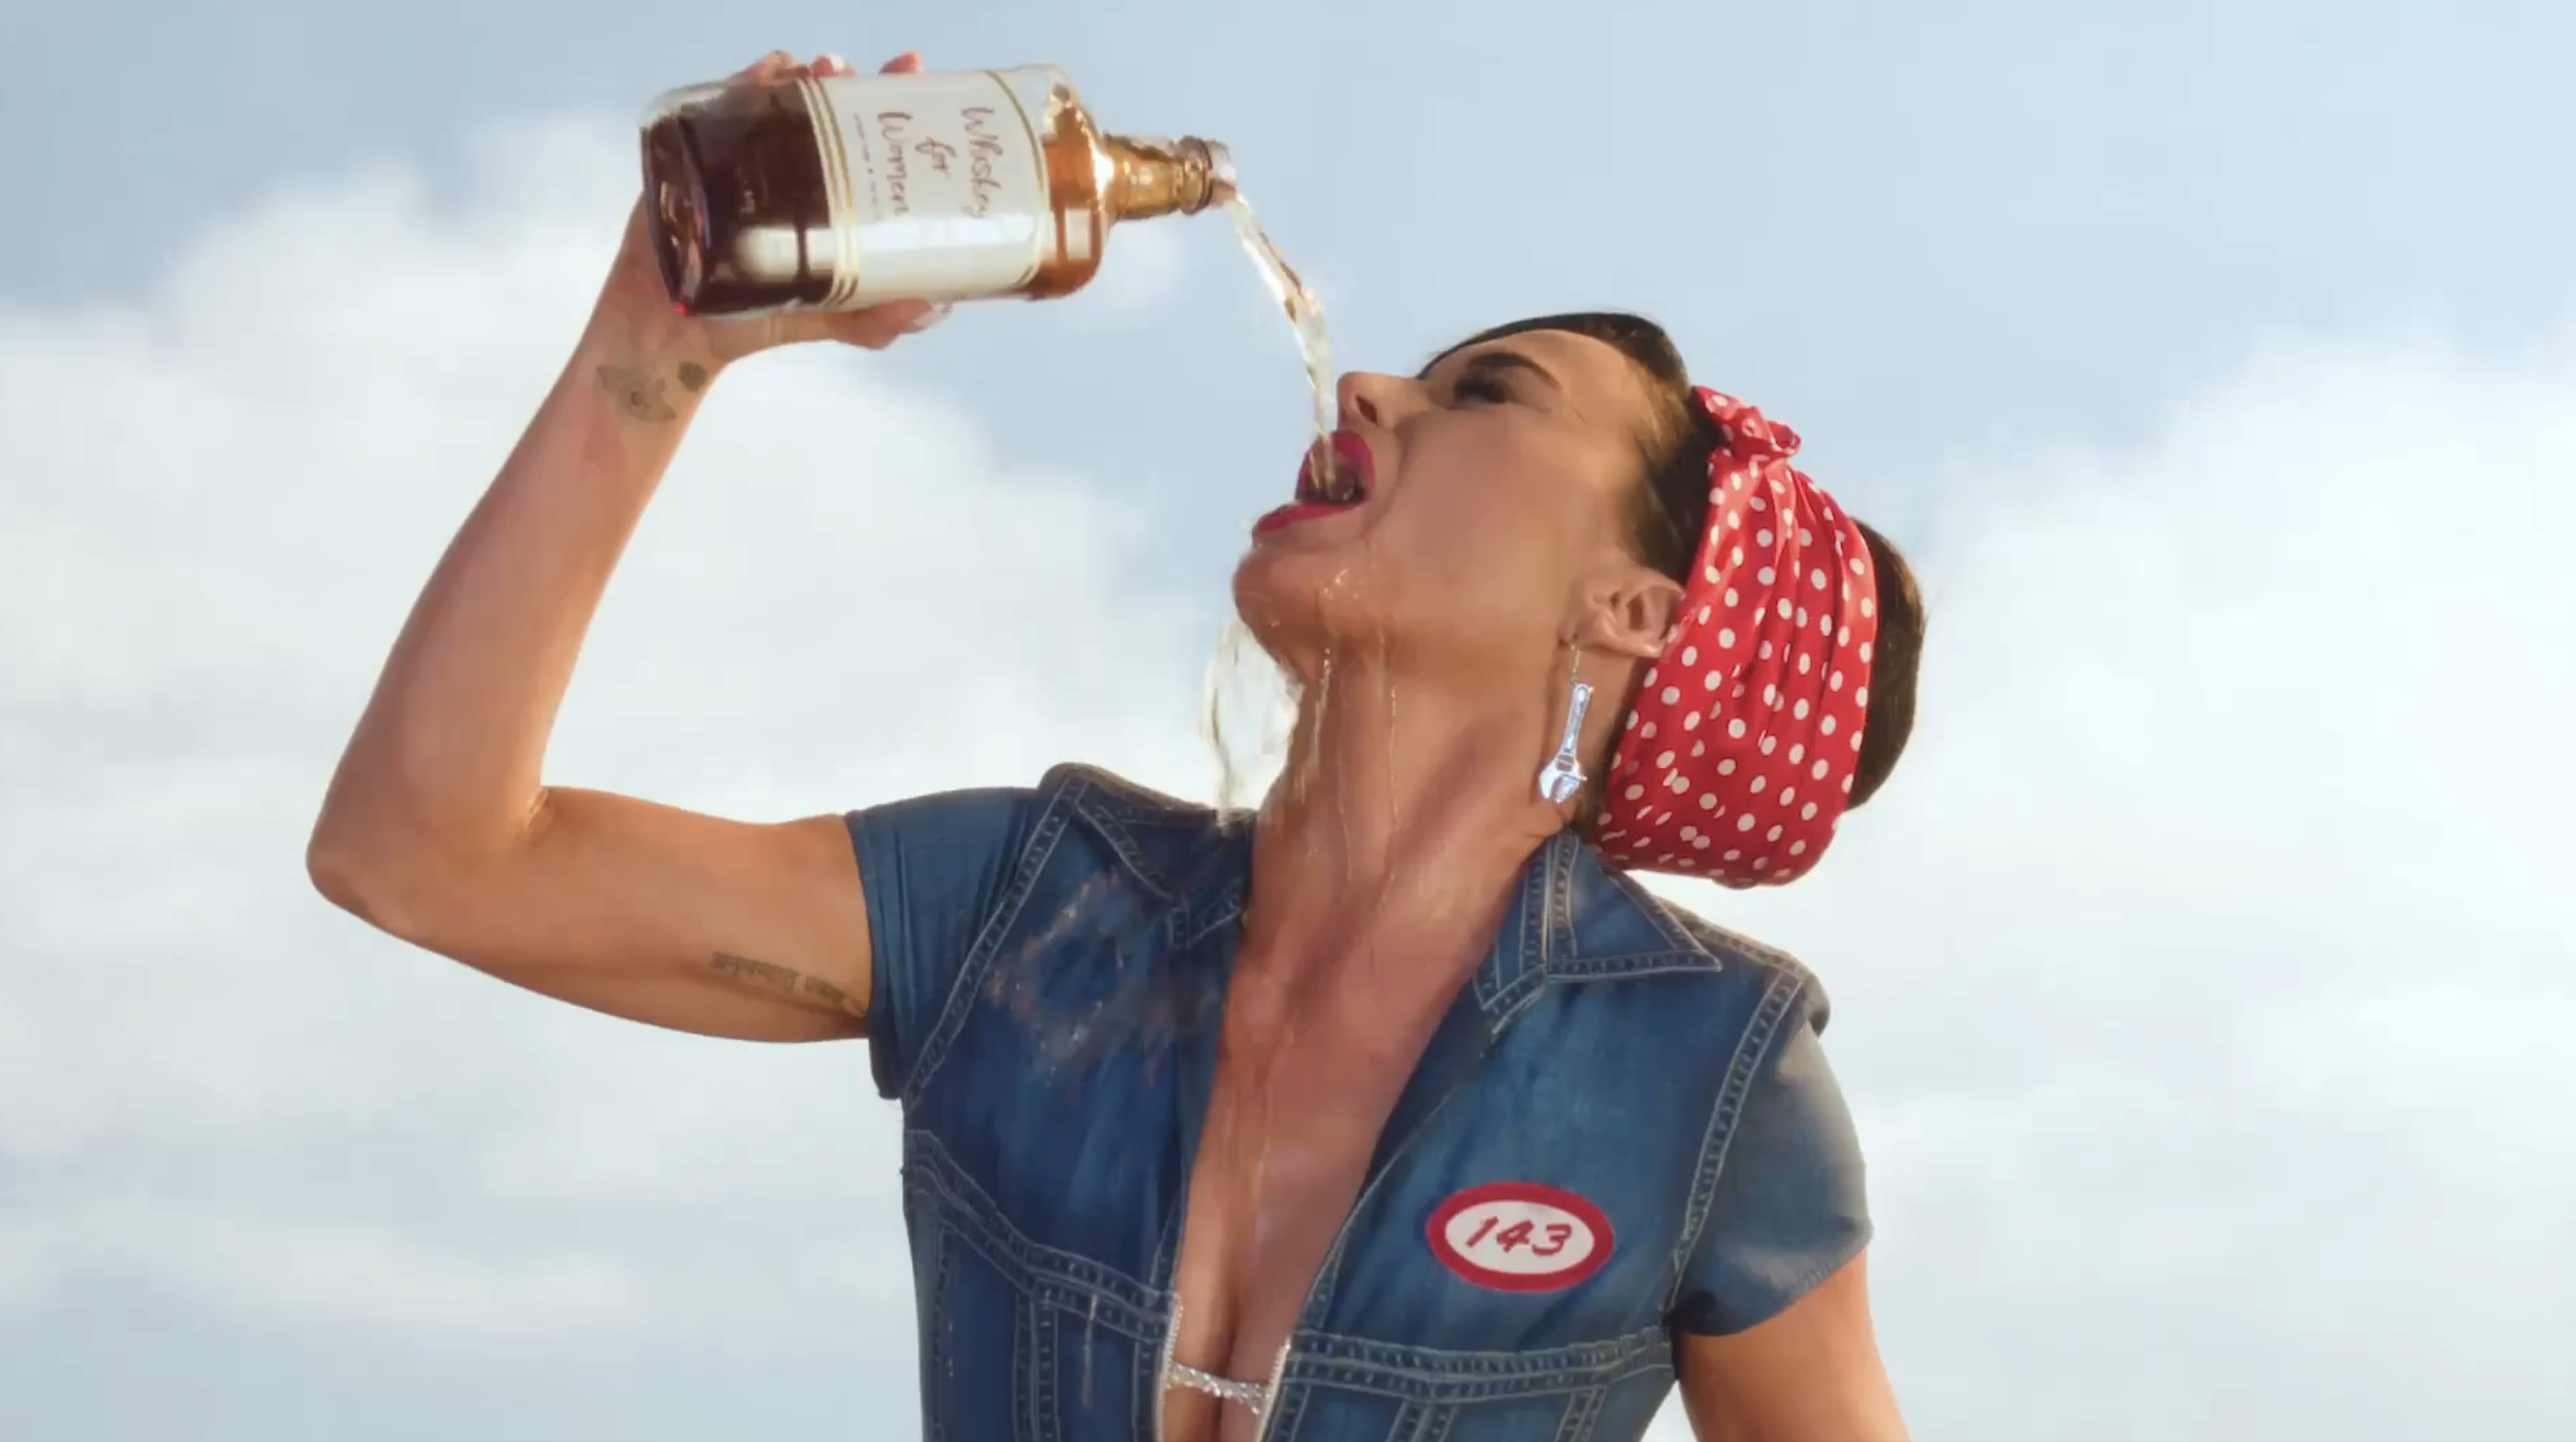 A person with a red polka dot headband and denim attire is pouring a bottle of liquid into their mouth with the liquid spilling